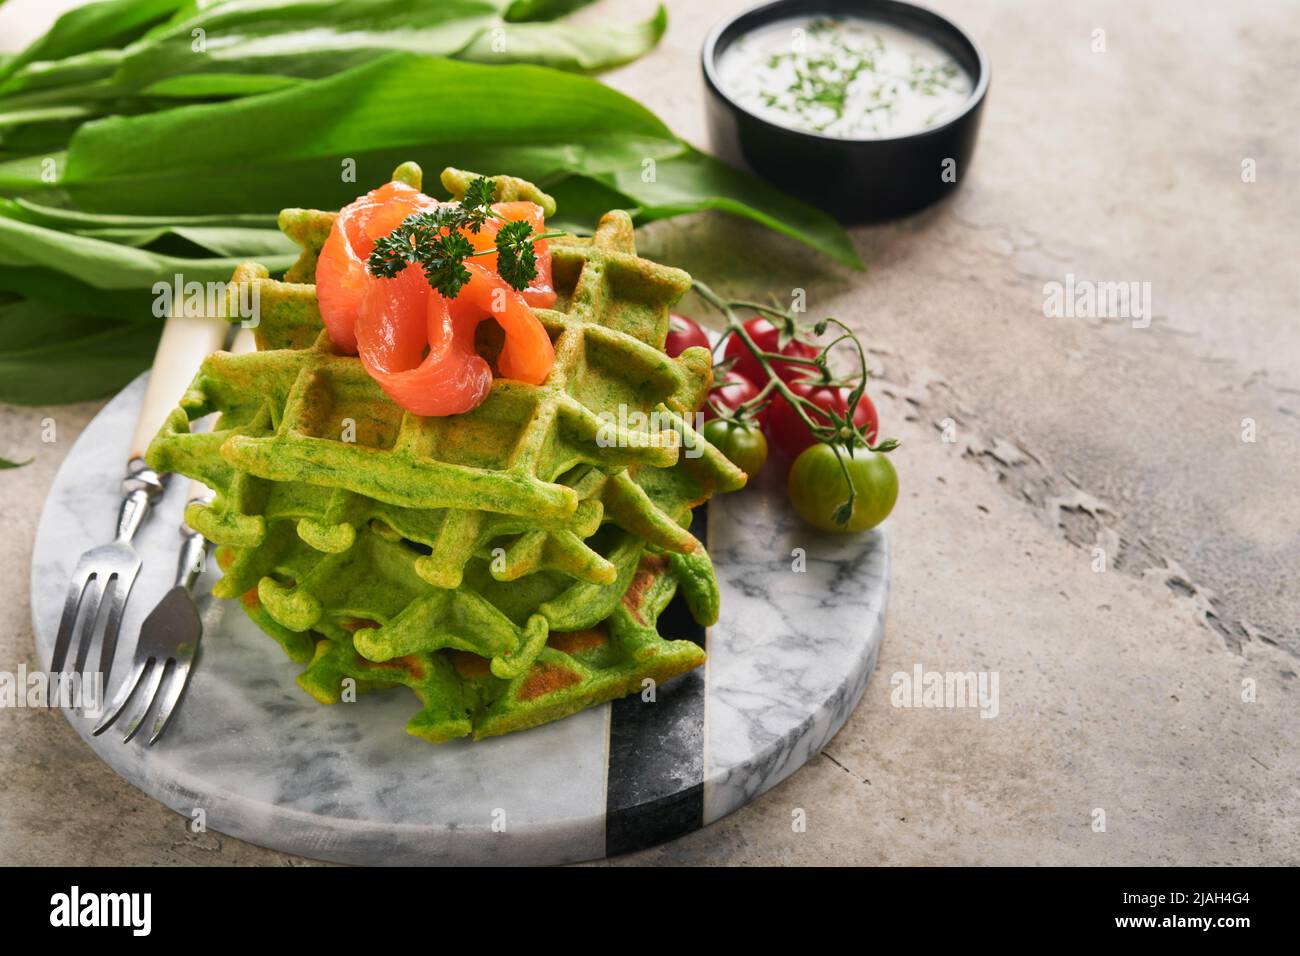 Mitraillette type of Belgian sandwich and Fricalette, Belgian delicacies  Stock Photo - Alamy